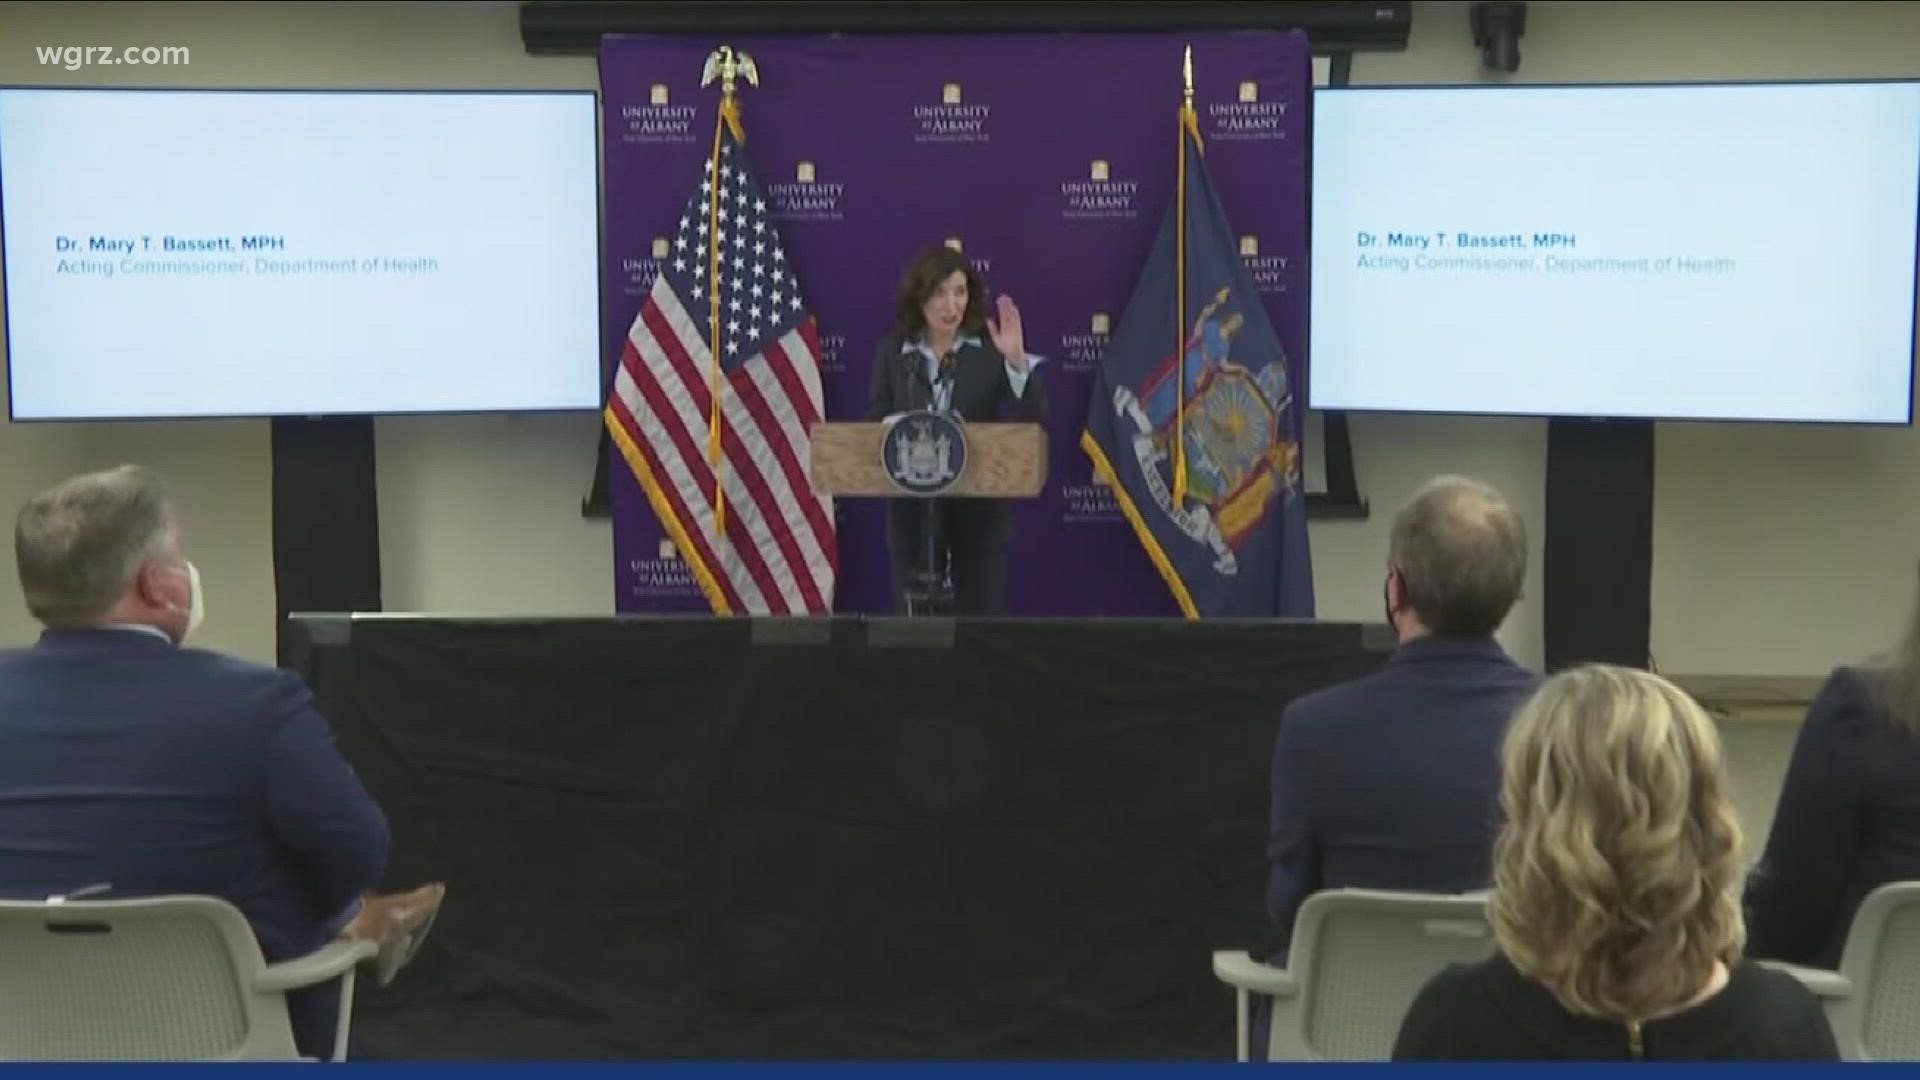 Governor Kathy Hochul held another briefing on the state's COVID-19 response Friday afternoon while in Albany. She says 64 million tests have now been secured.